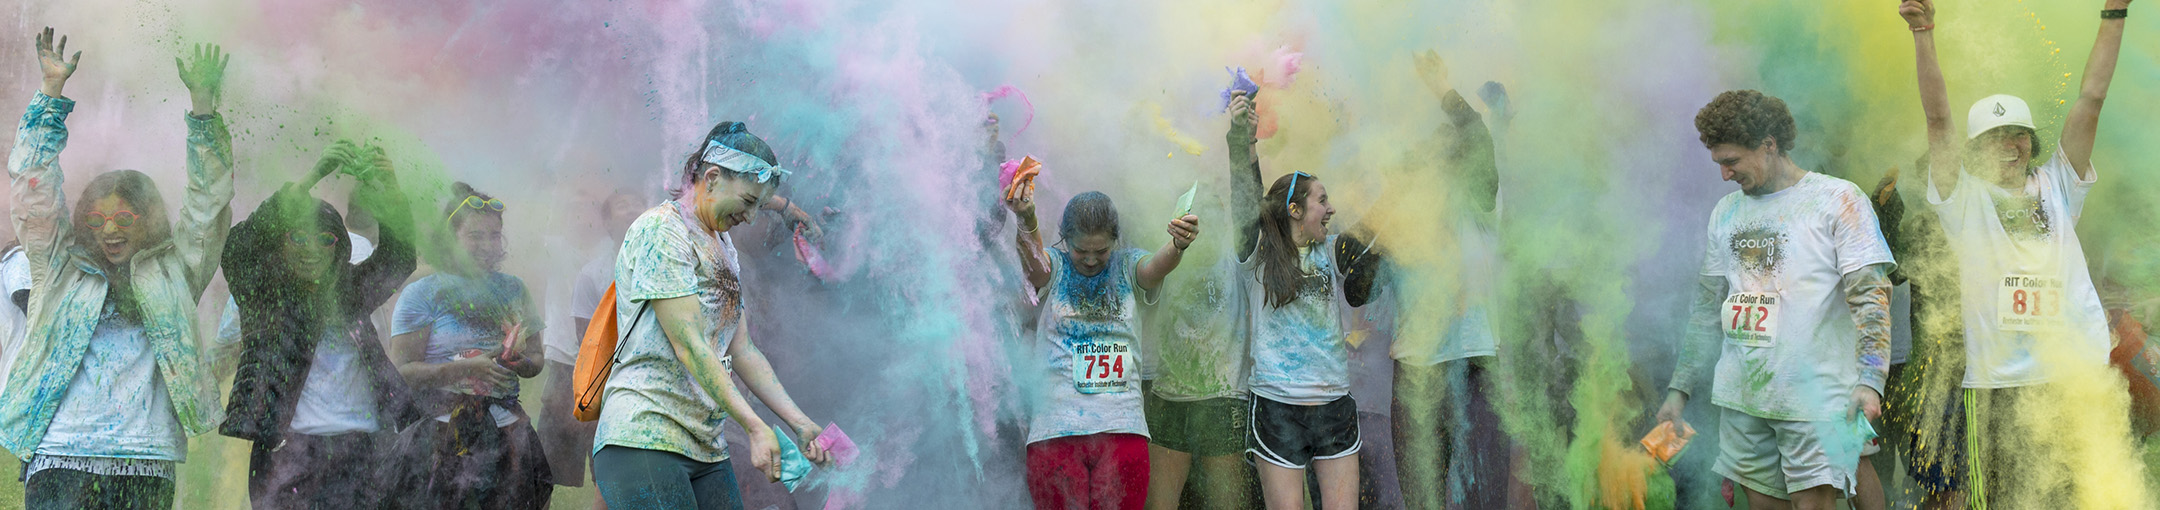 students in athletic wear stand under clouds of colored powder 